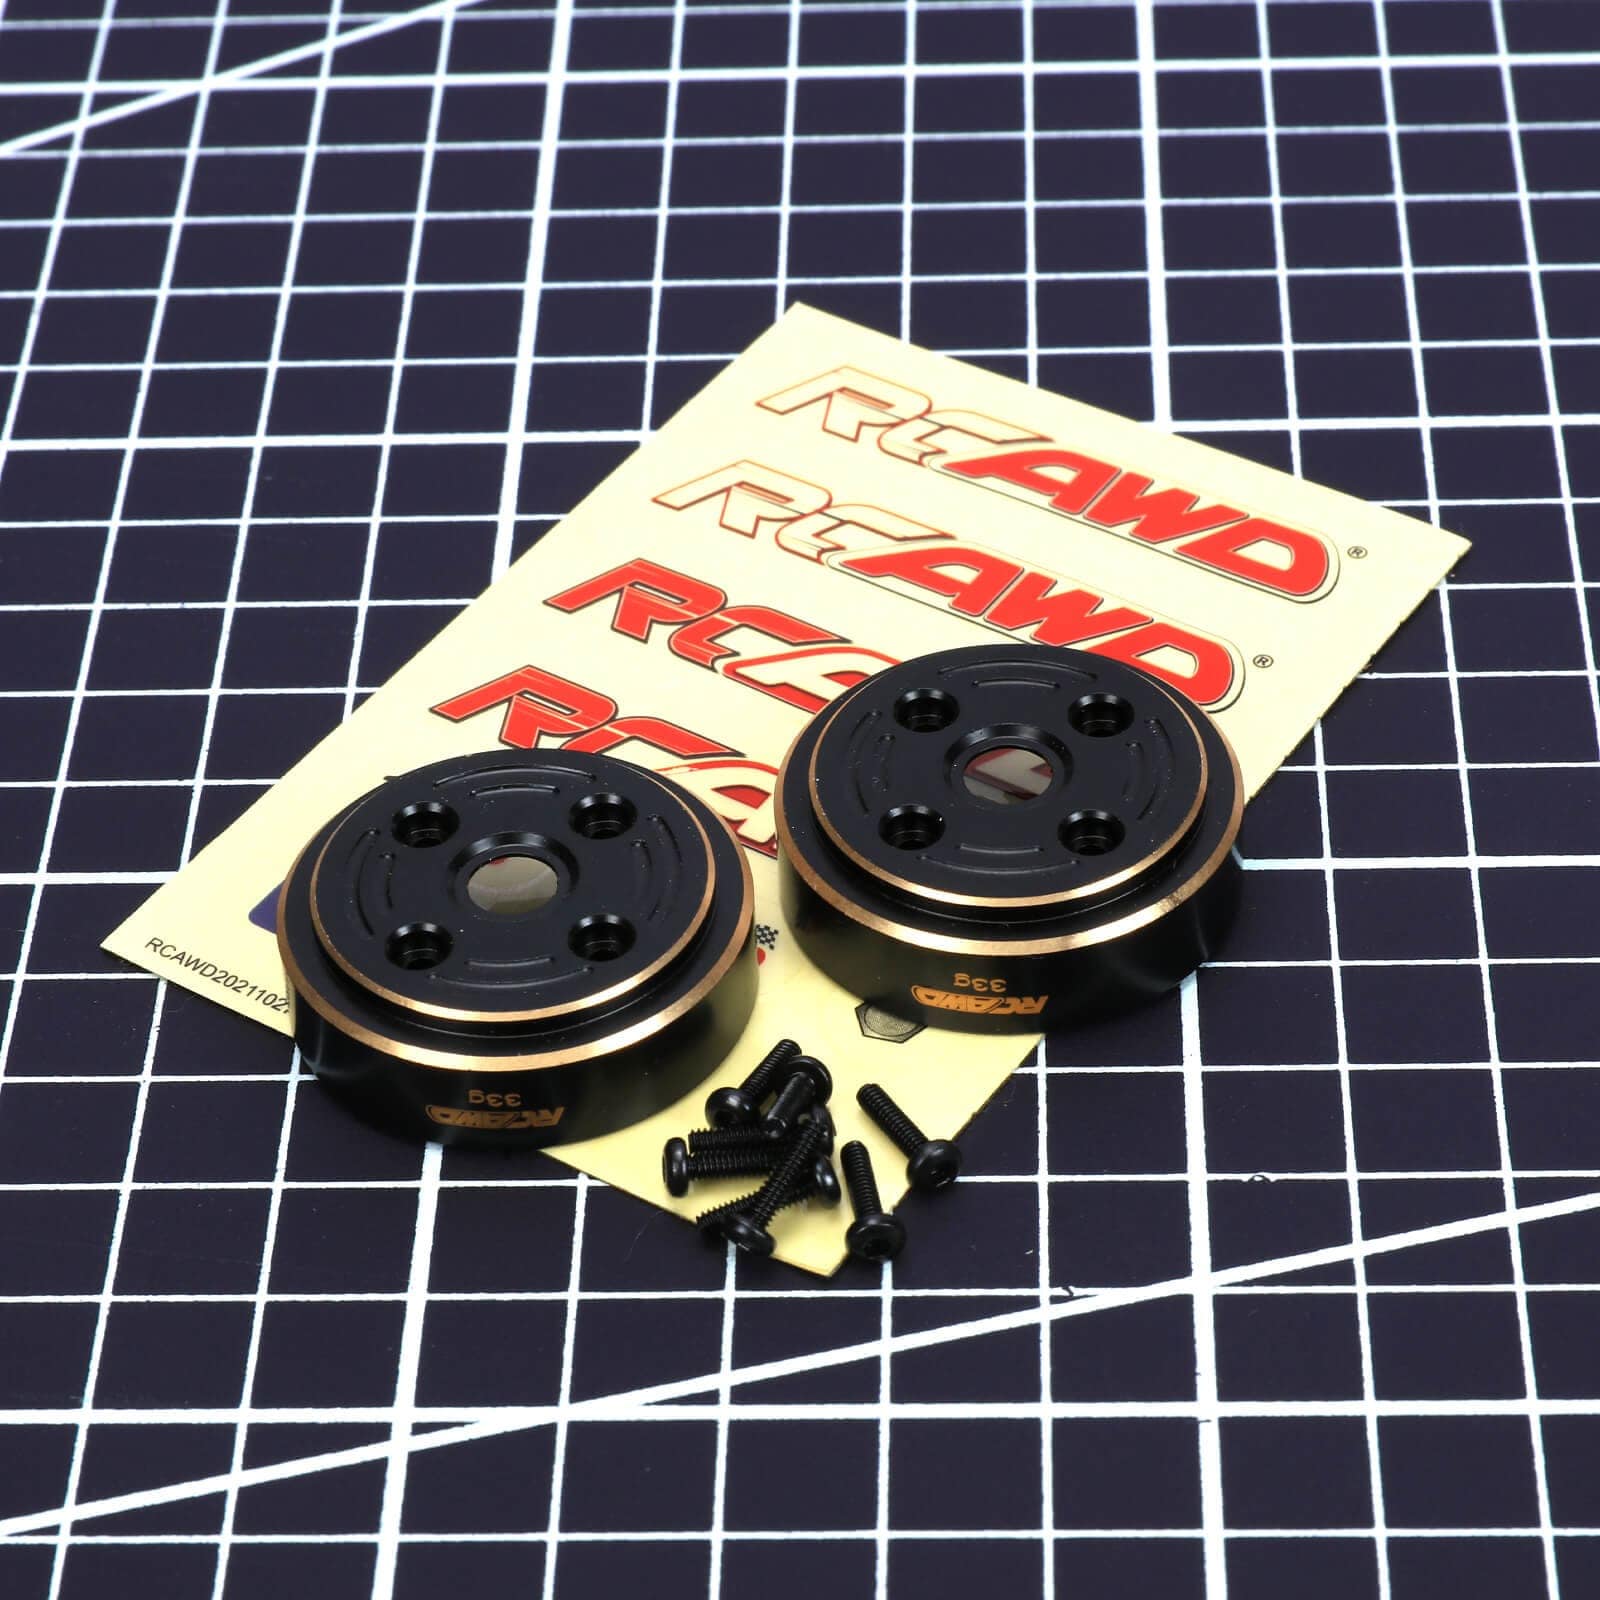 RCAWD FMS FCX24 Standard RCAWD FCX24/SCX24 Upgrade Brass Front Rear Portal Weights 2pcs 33g